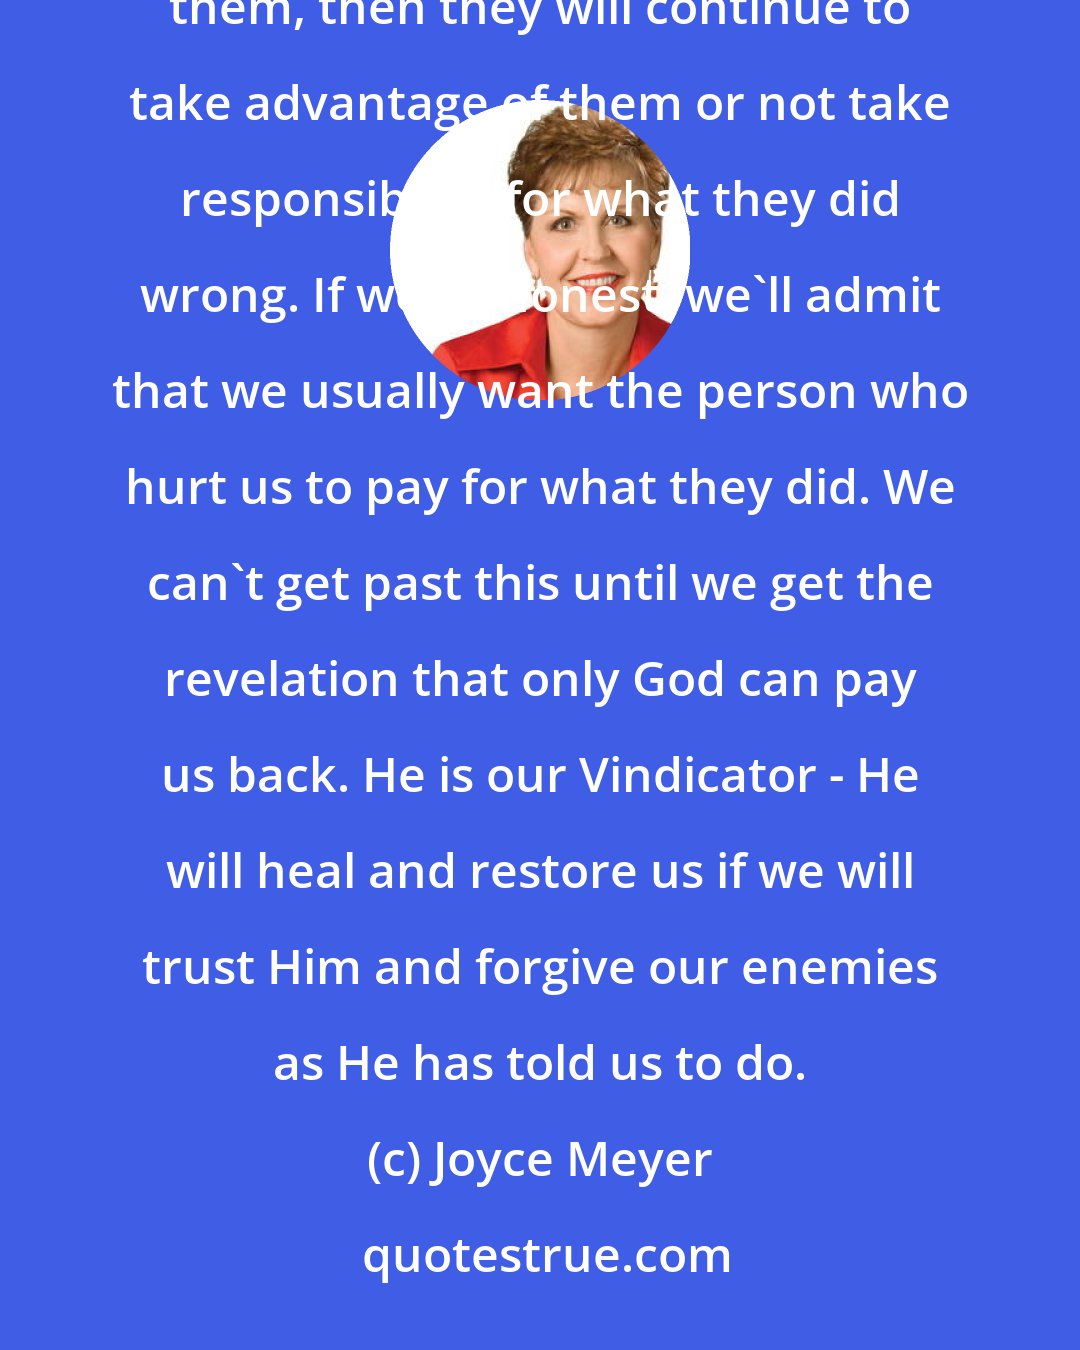 Joyce Meyer: When an injustice happens, we want to be vindicated. People feel that if they forgive the person who hurt them, then they will continue to take advantage of them or not take responsibility for what they did wrong. If we're honest, we'll admit that we usually want the person who hurt us to pay for what they did. We can't get past this until we get the revelation that only God can pay us back. He is our Vindicator - He will heal and restore us if we will trust Him and forgive our enemies as He has told us to do.